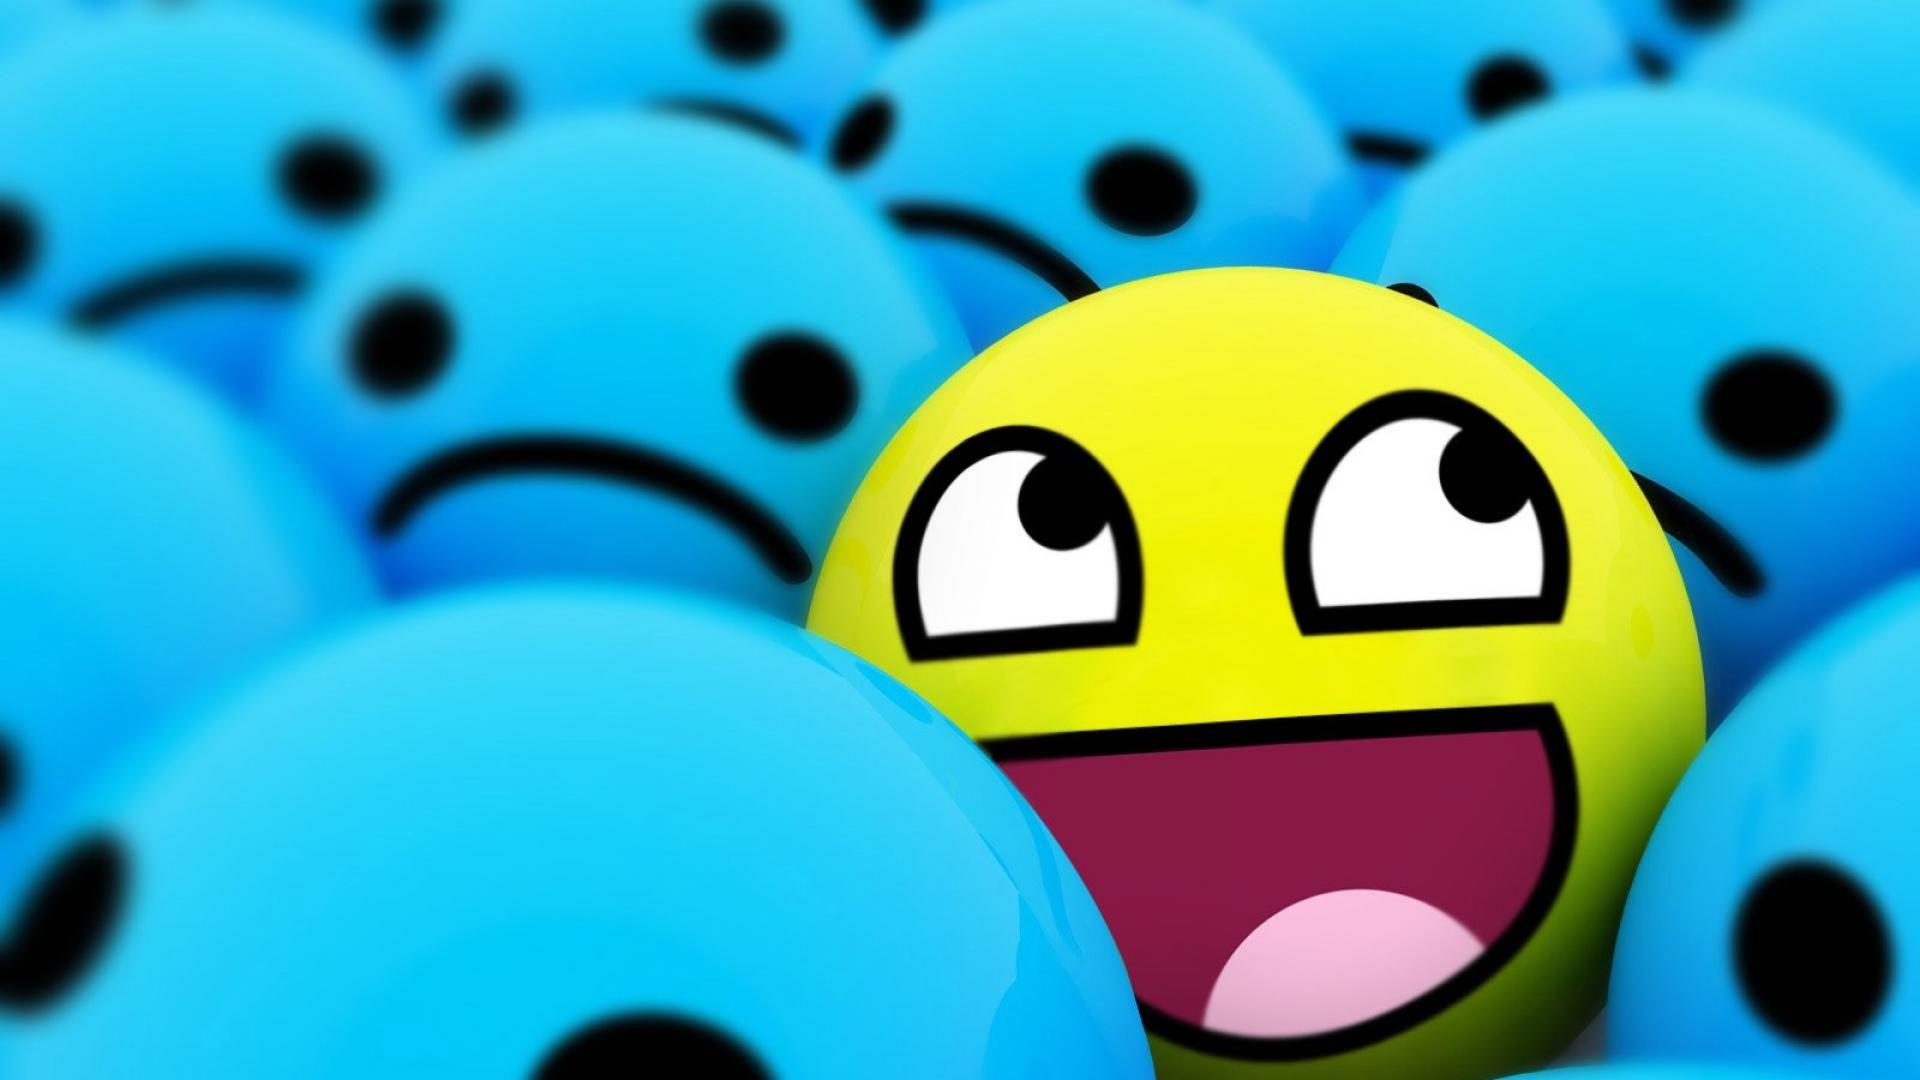 Free 3D Smiley Face, Download Free Clip Art, Free Clip Art